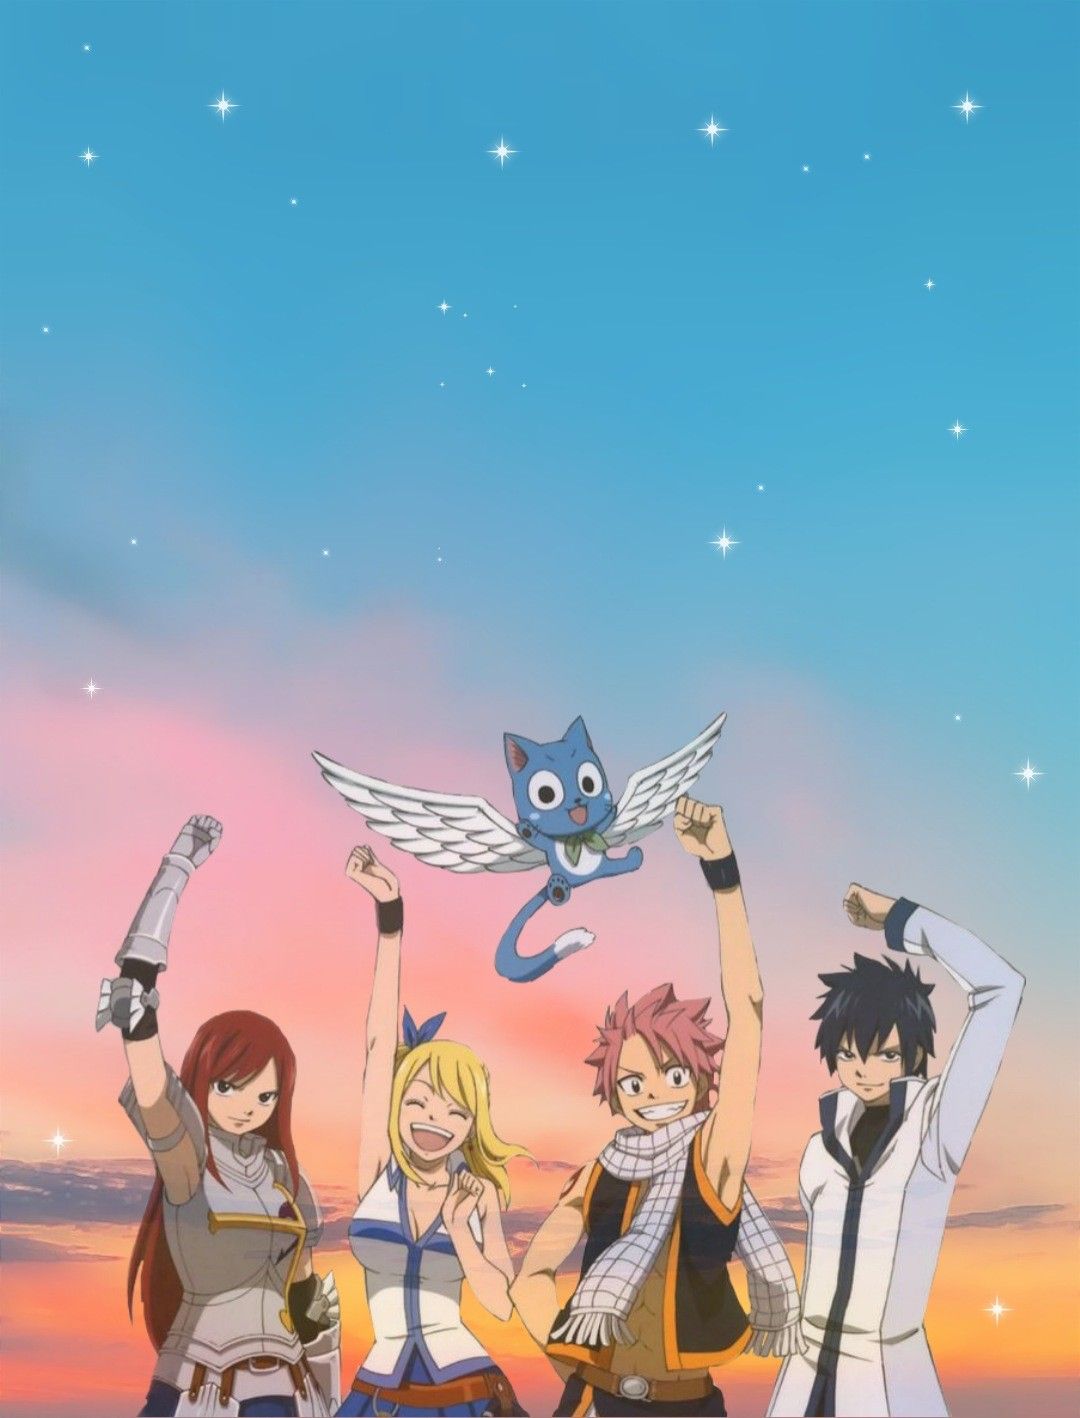 We are fairy tail. Fairy tail picture, Fairy tail anime, Fairy tail background